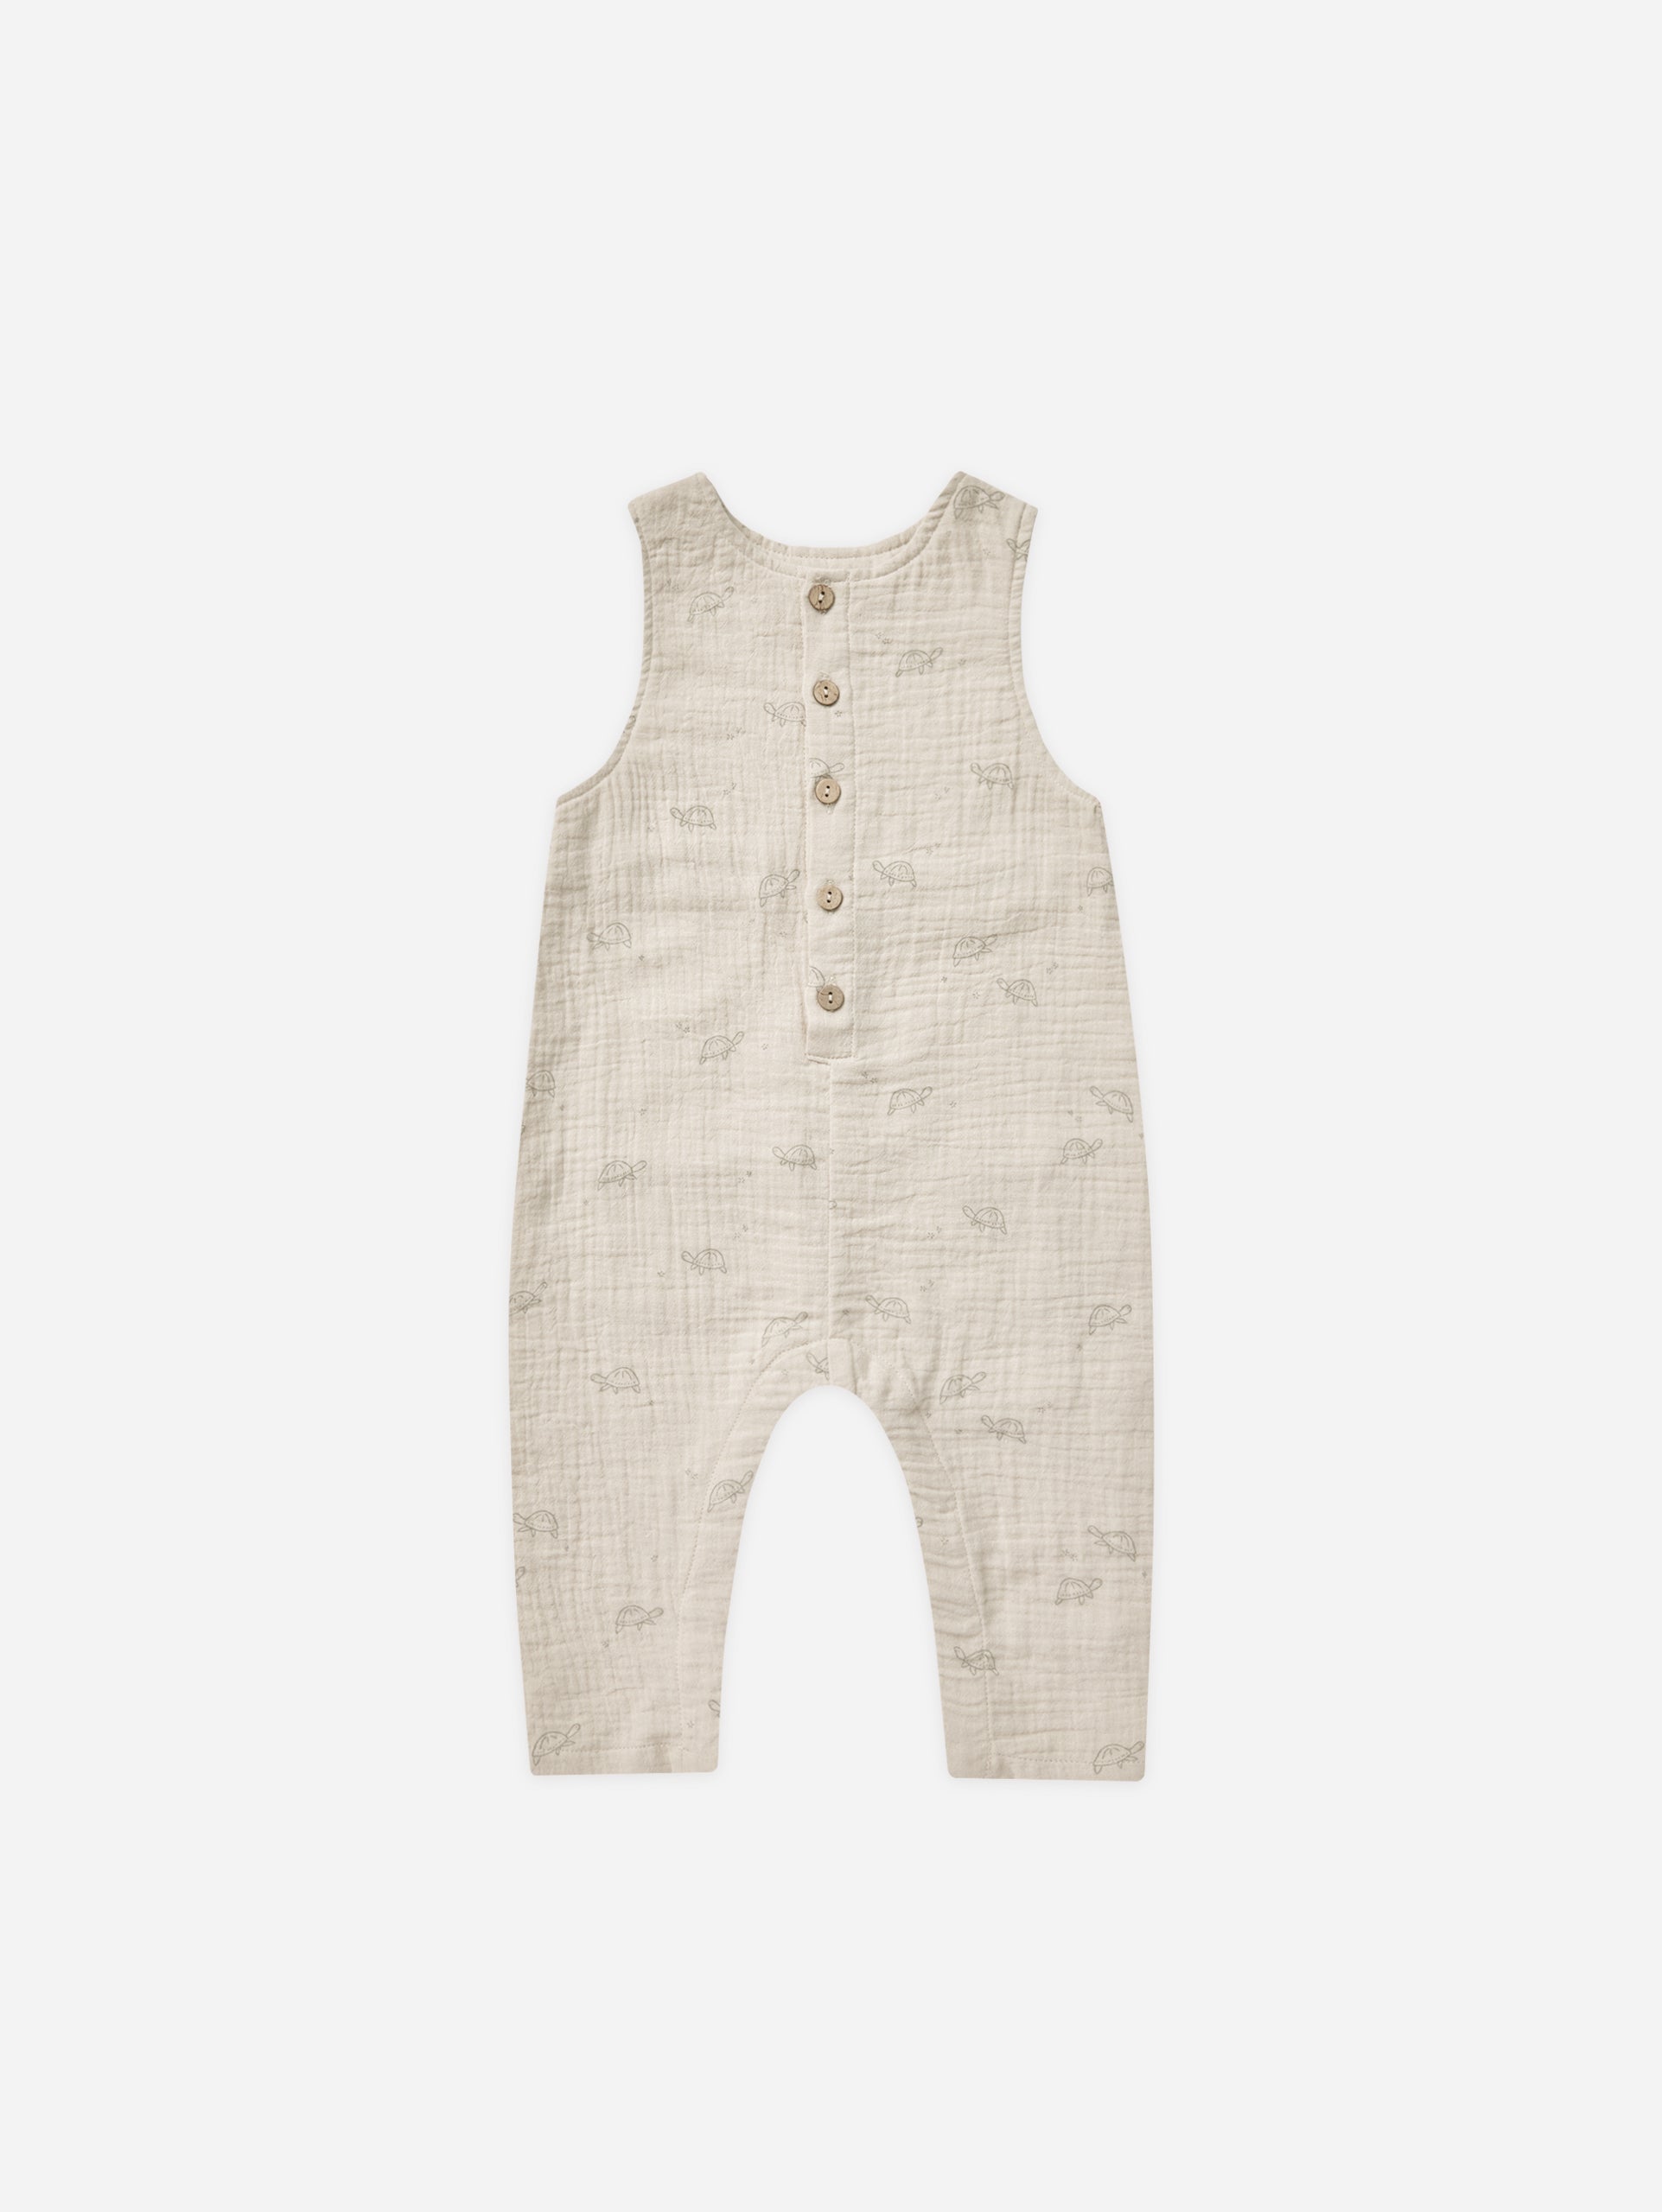 Button Jumpsuit || Turtles - Rylee + Cru | Kids Clothes | Trendy Baby Clothes | Modern Infant Outfits |